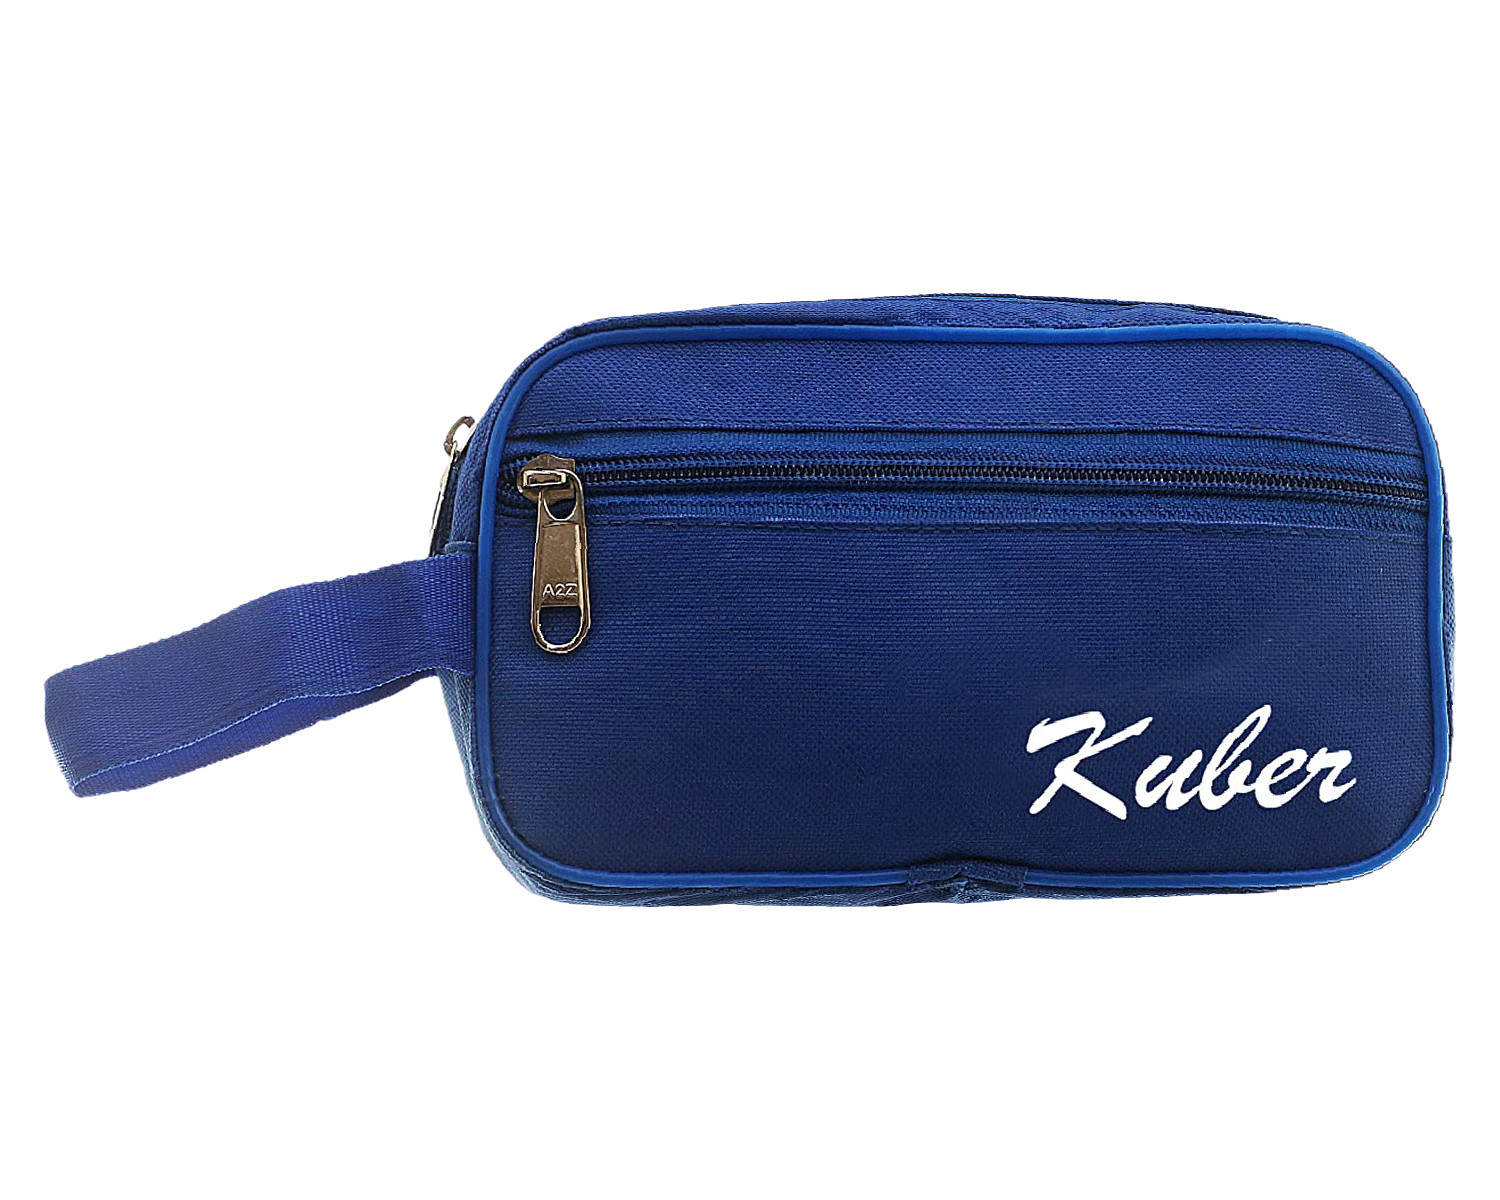 Kuber Industries Canvas Toiletry Organizer|Waterproof & Portable Travel Shaving Dopp Kit With 2 Main ComparMants And Front Zipper (Navy Blue)